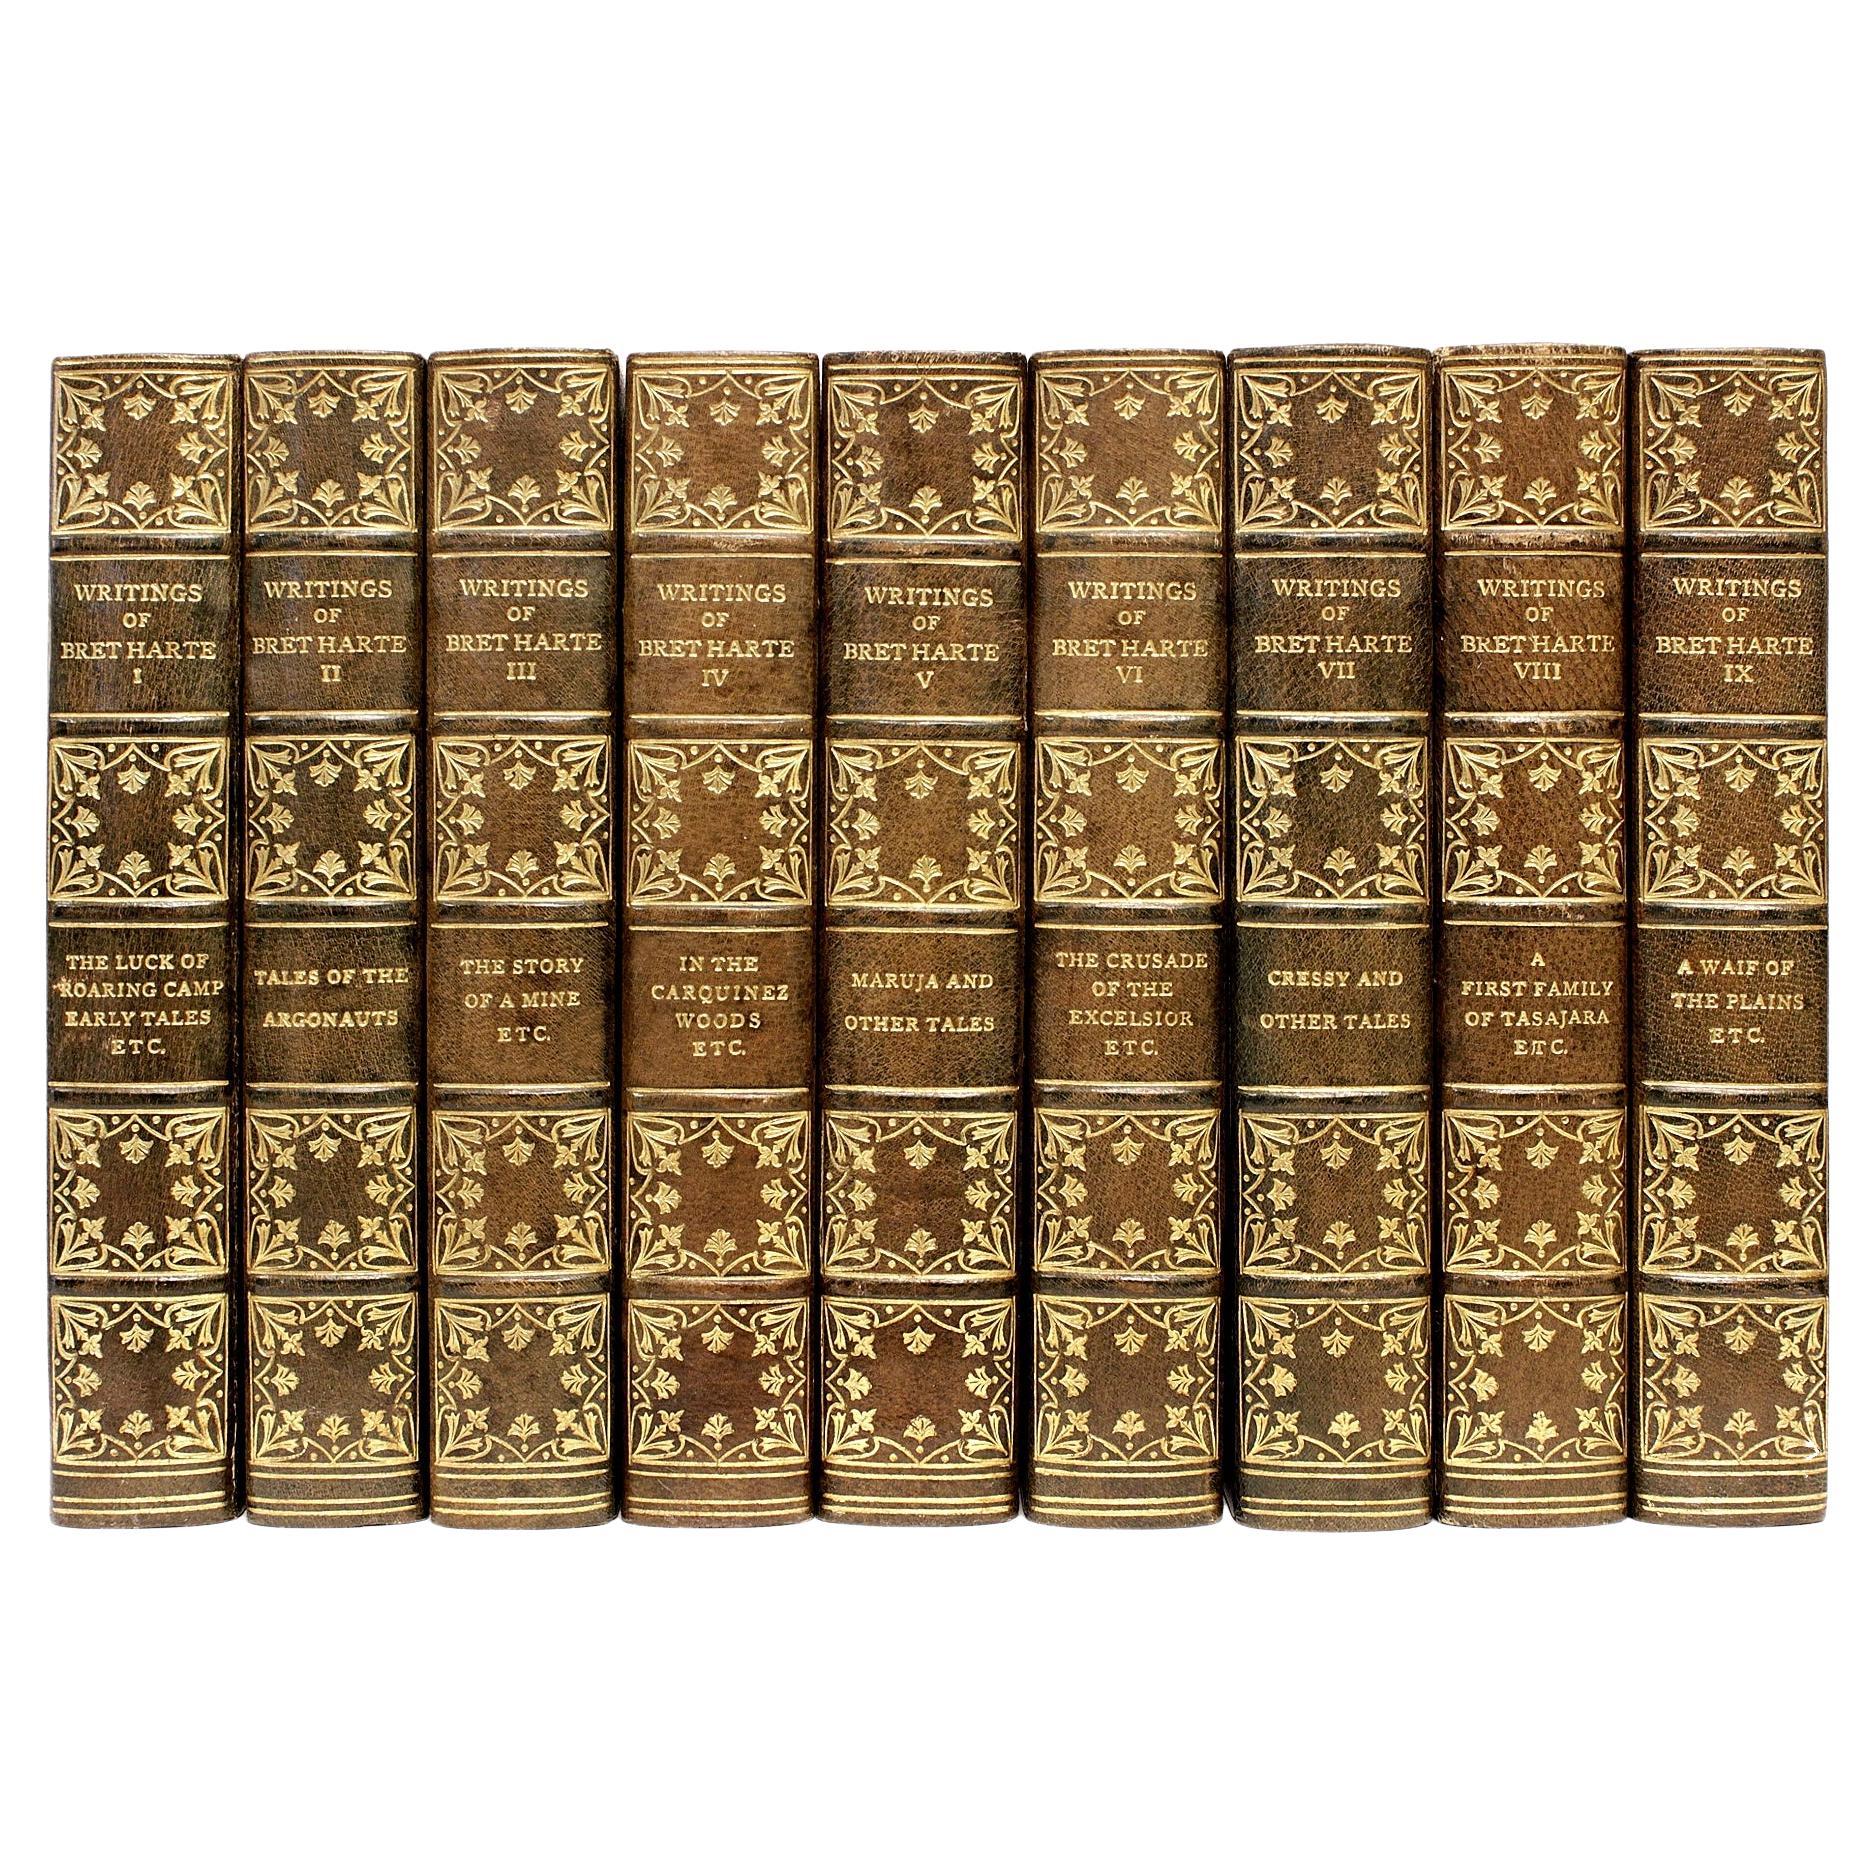 Complete Writings of Bret Harte, 19 Volumes, 1899, In A Fine Leather Binding! For Sale